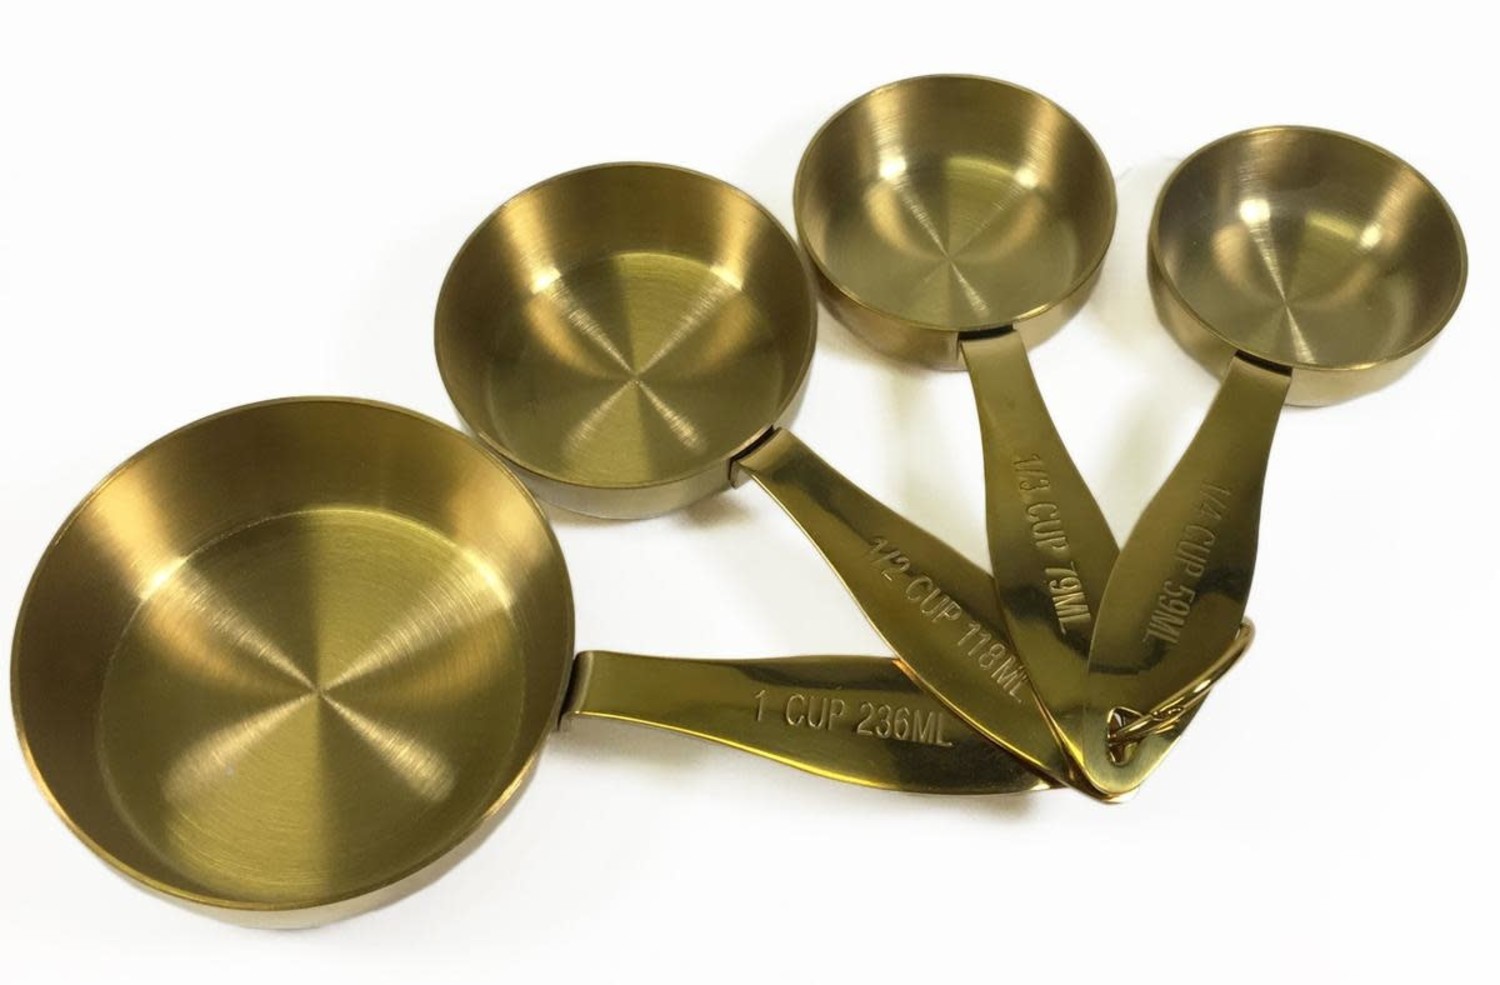 Maison Plus Gold Measuring Cups & Spoons Set, Stainless Steel on